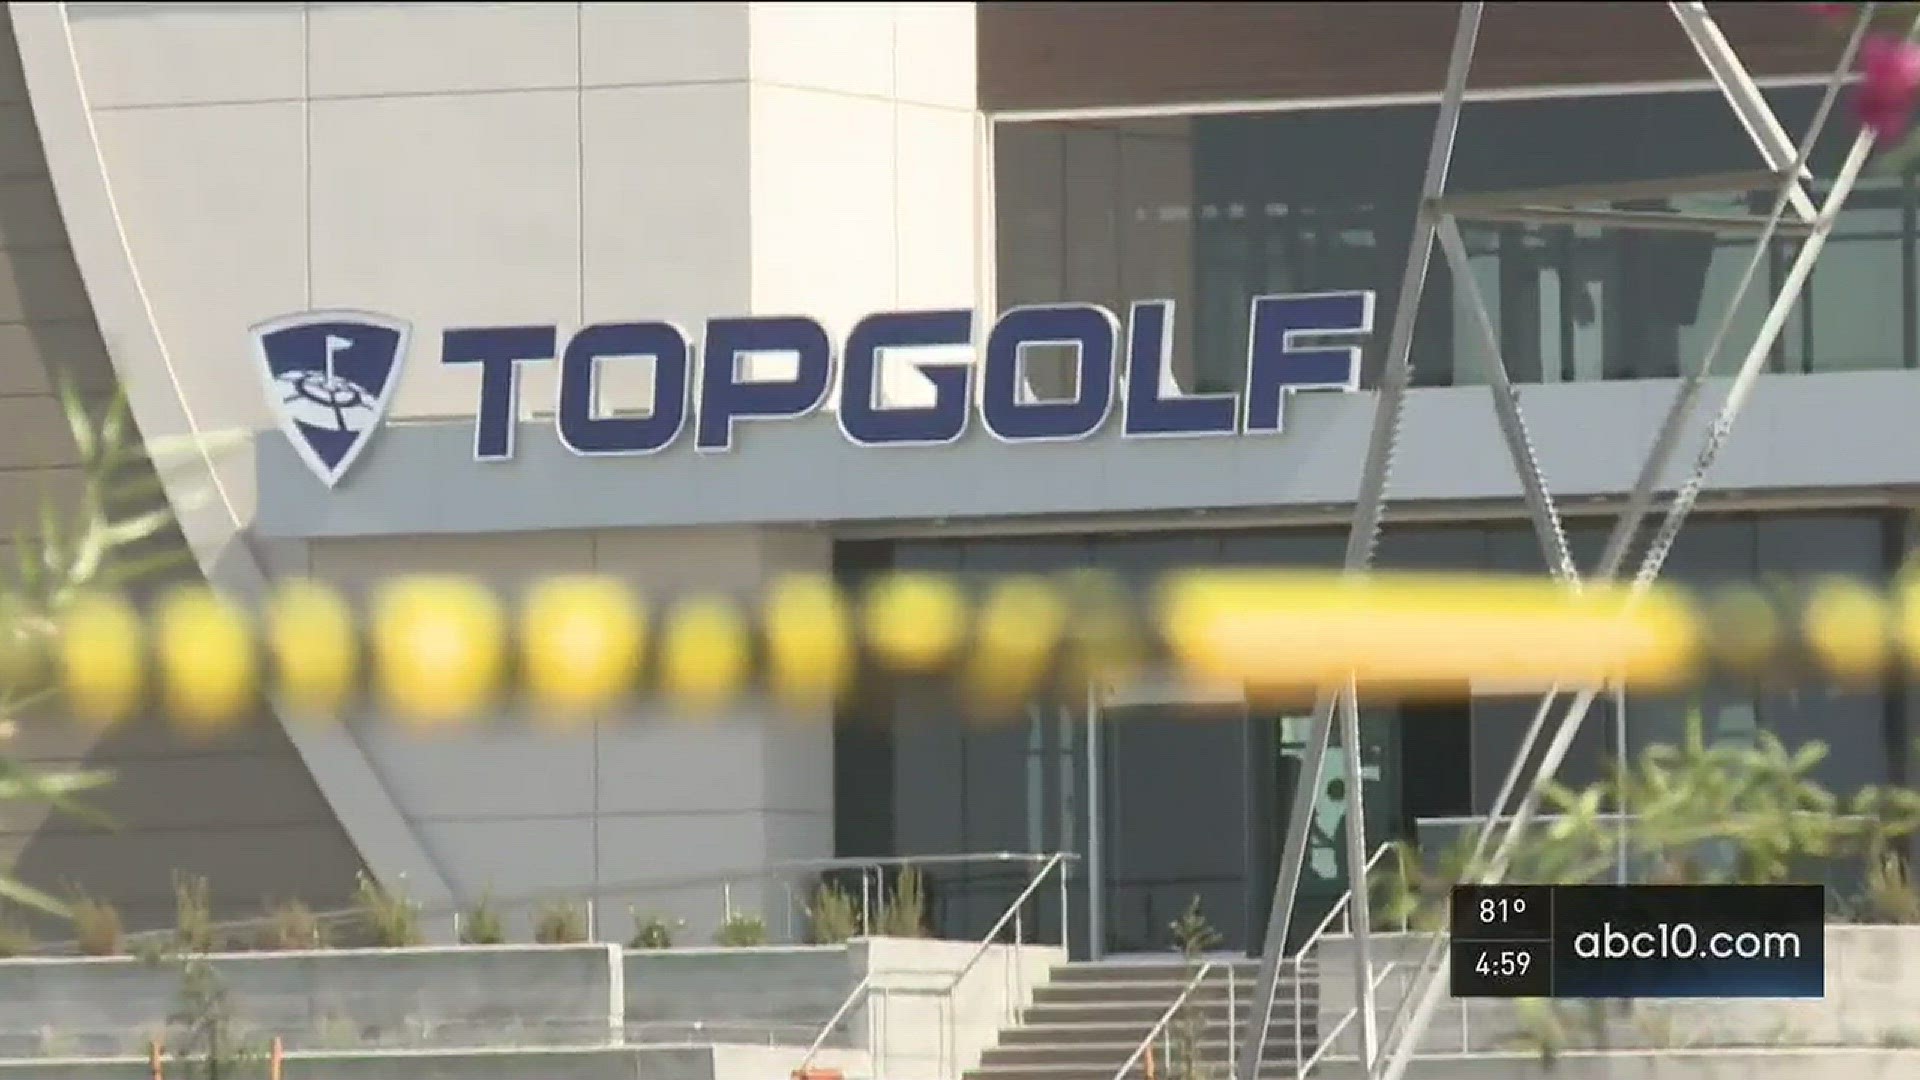 Noise is on the topic of many neighbors, because TopGolf is more than just a driving range. (Sept. 14, 2016)